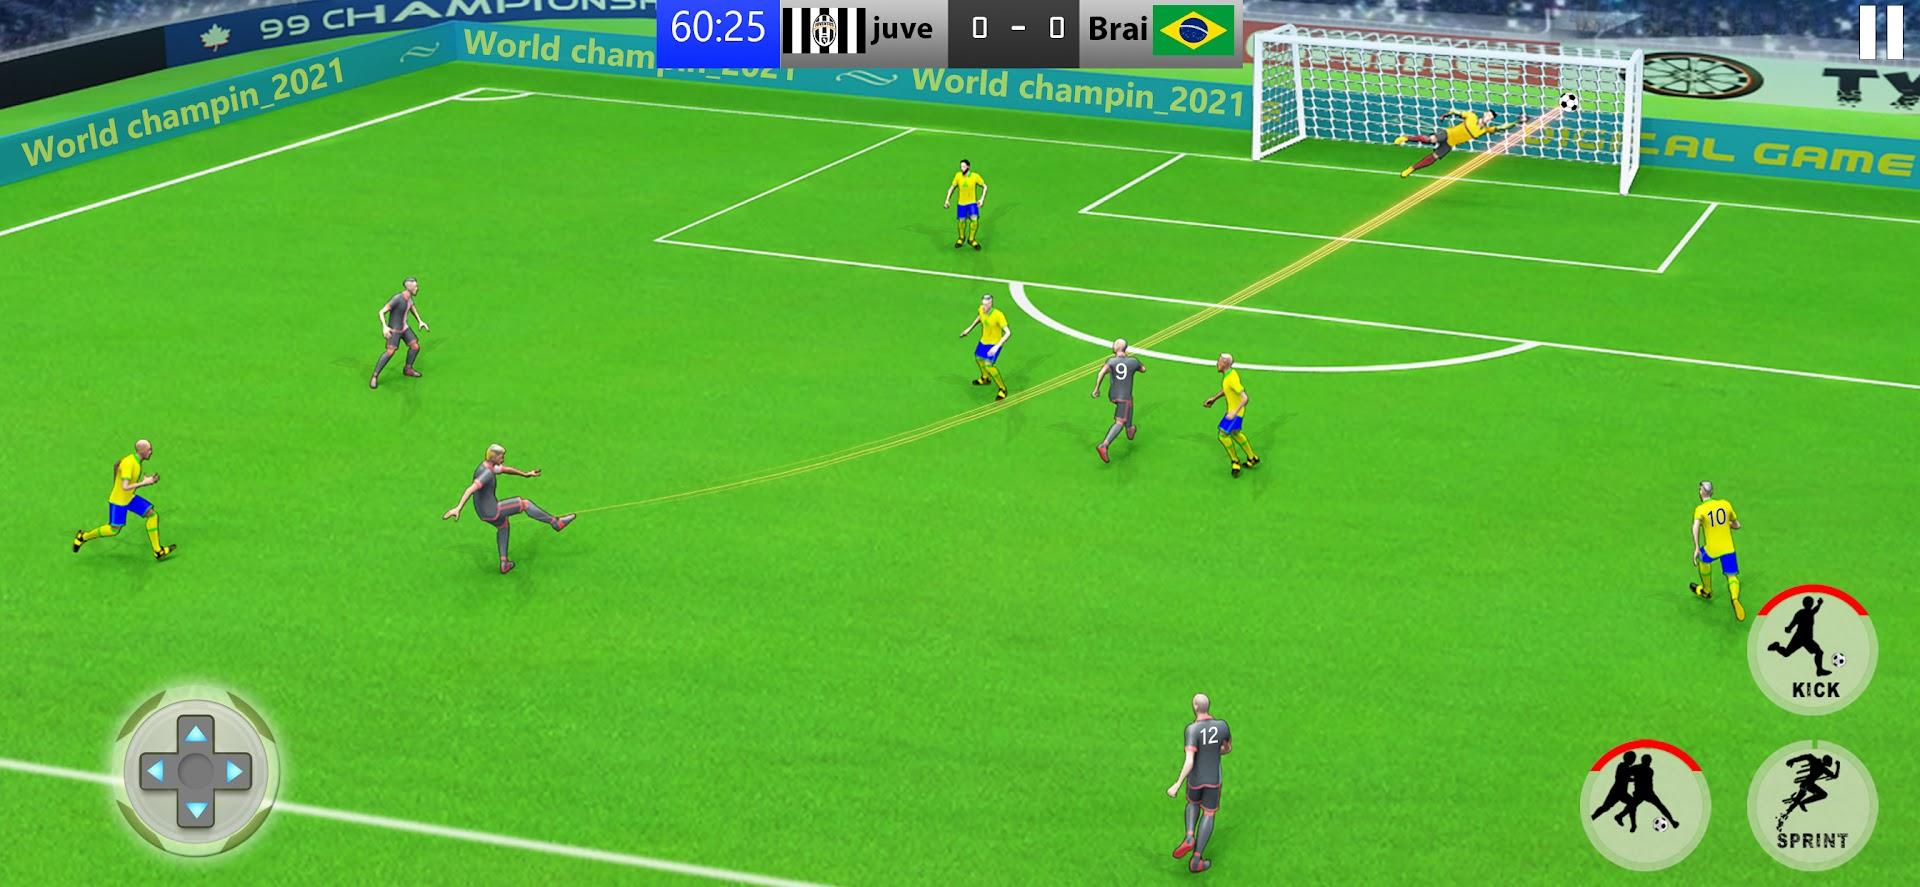 2 Player Soccer::Appstore for Android